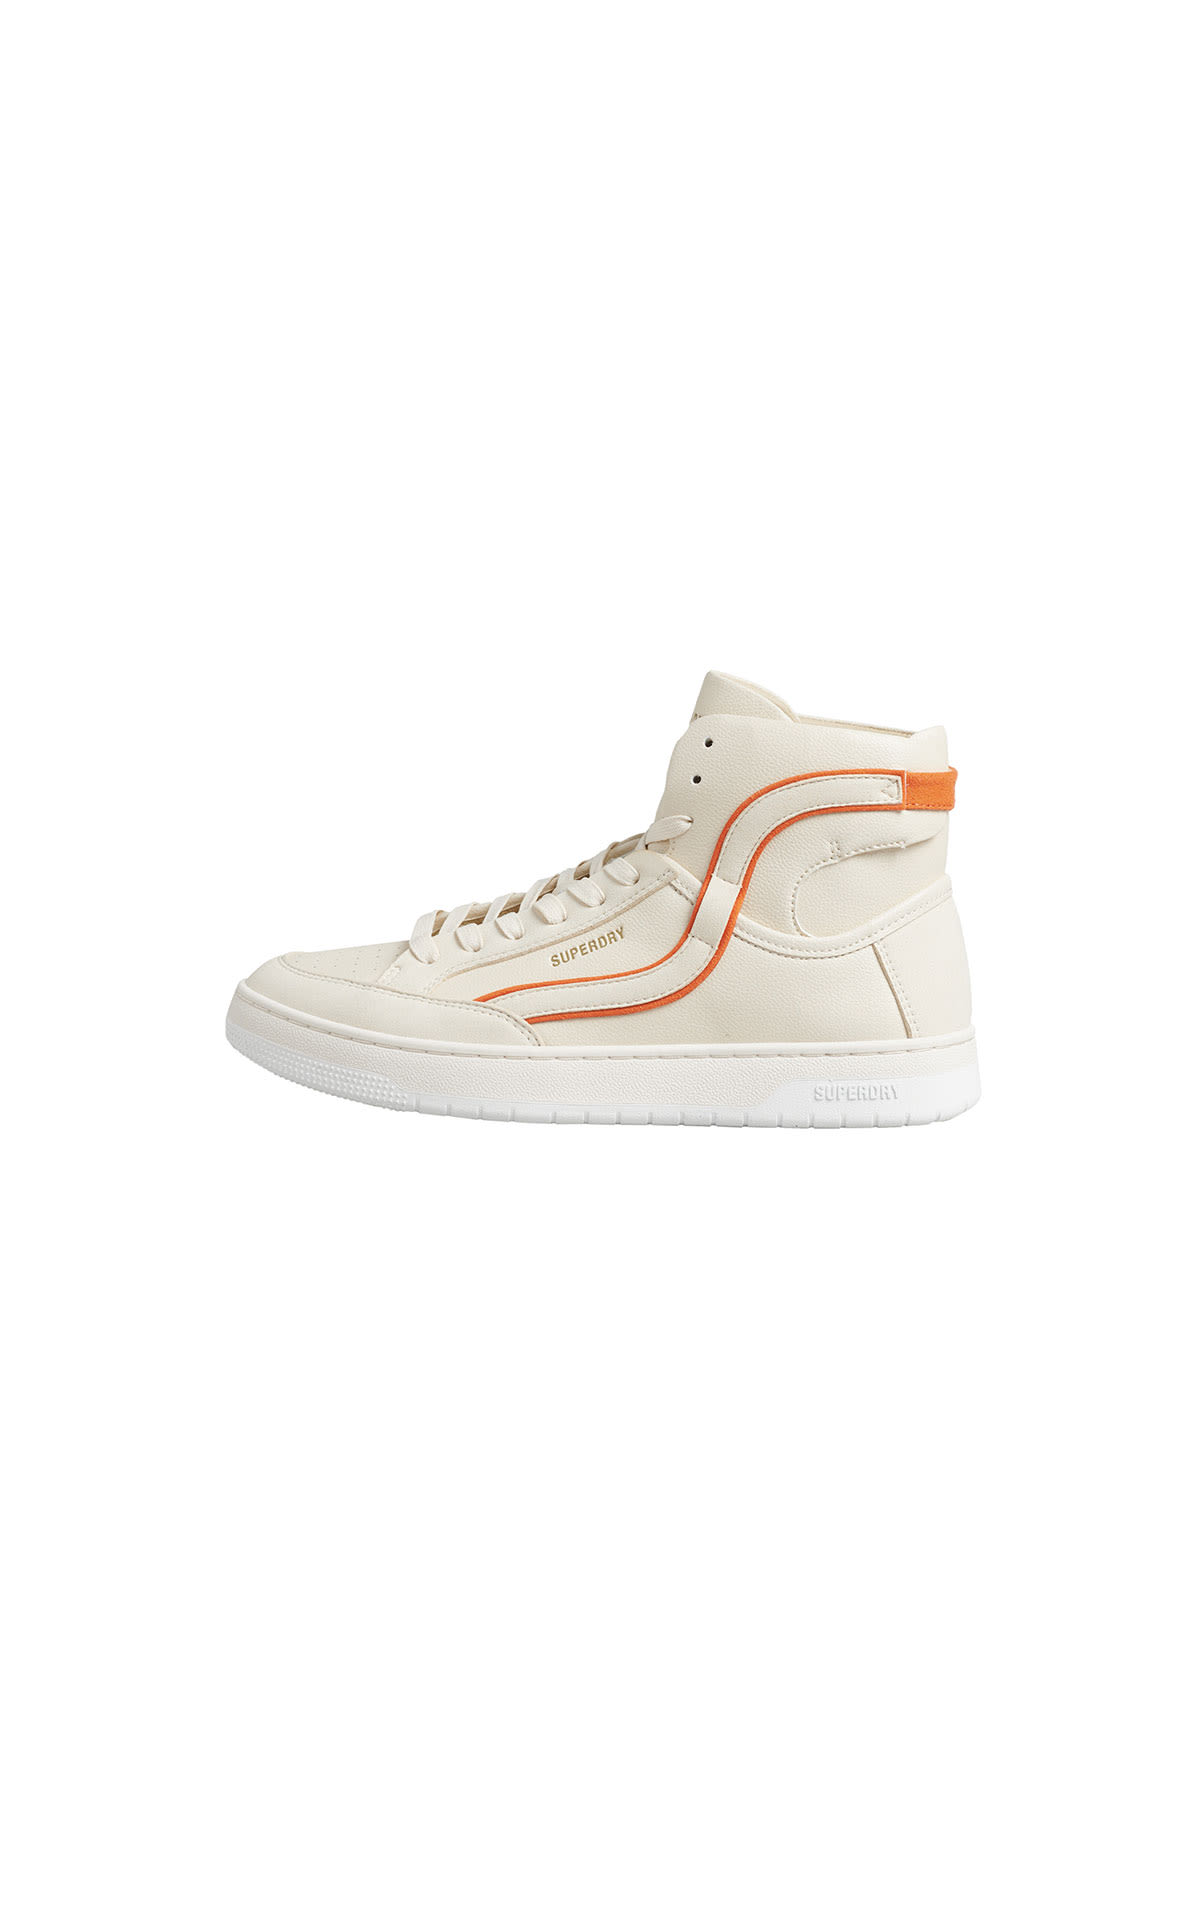 Superdry Oatmeal spiced orange trainers womens from Bicester Village